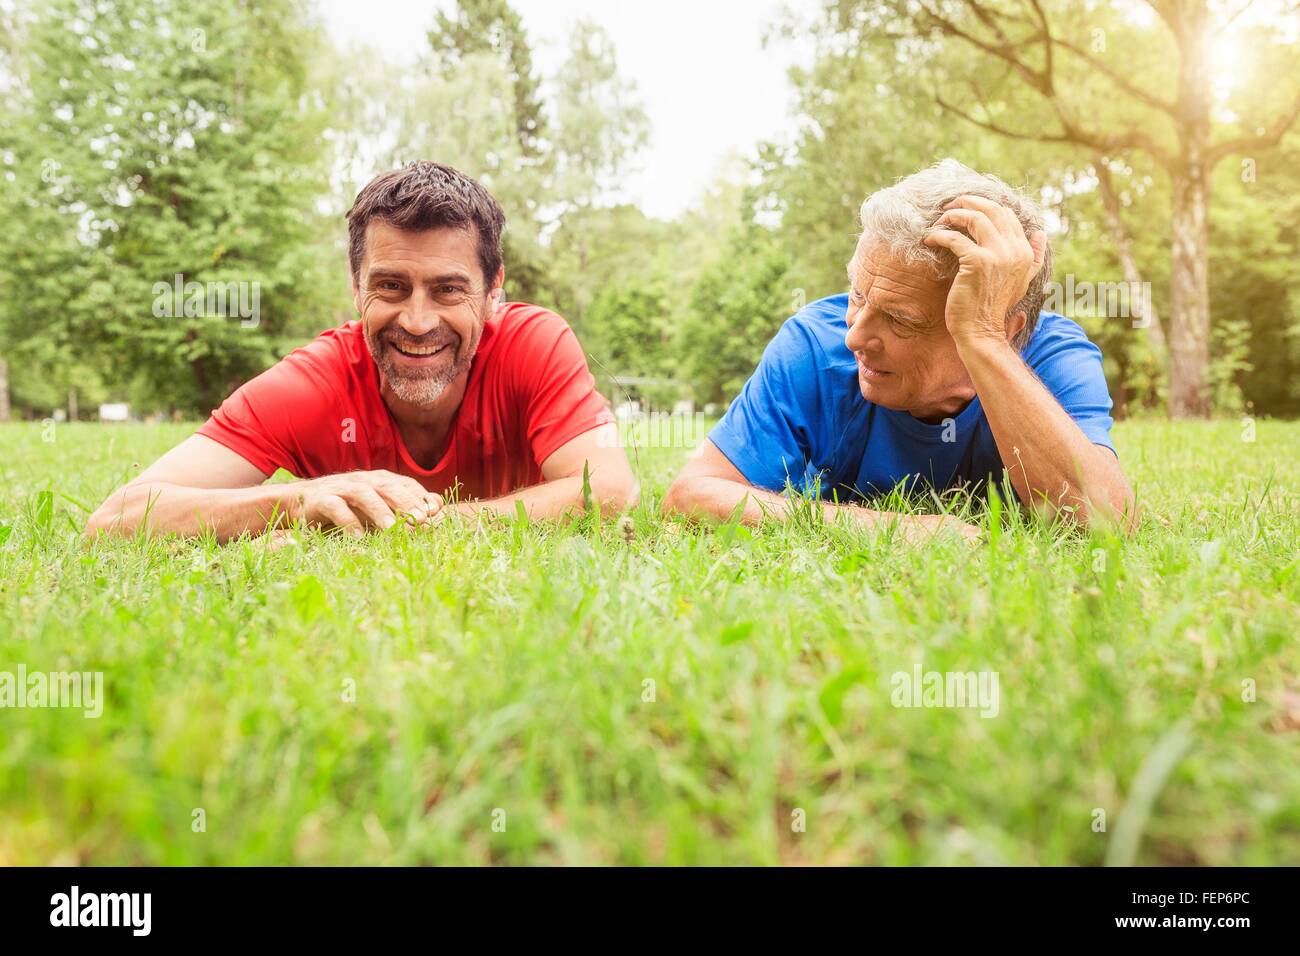 Two men relaxing on grass following exercise Stock Photo